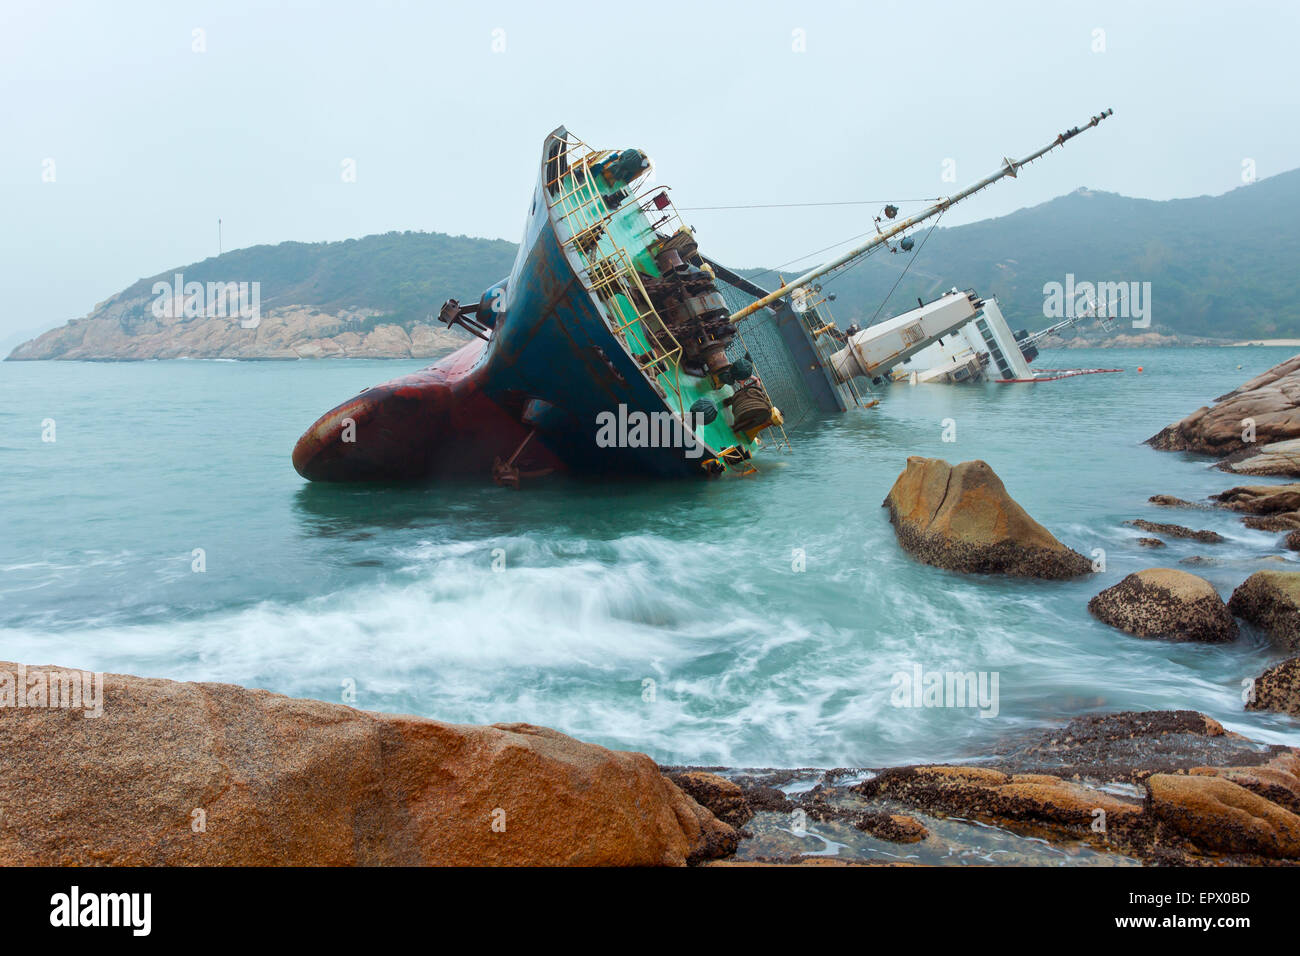 Wreck on the coast in Hong Kong Stock Photo